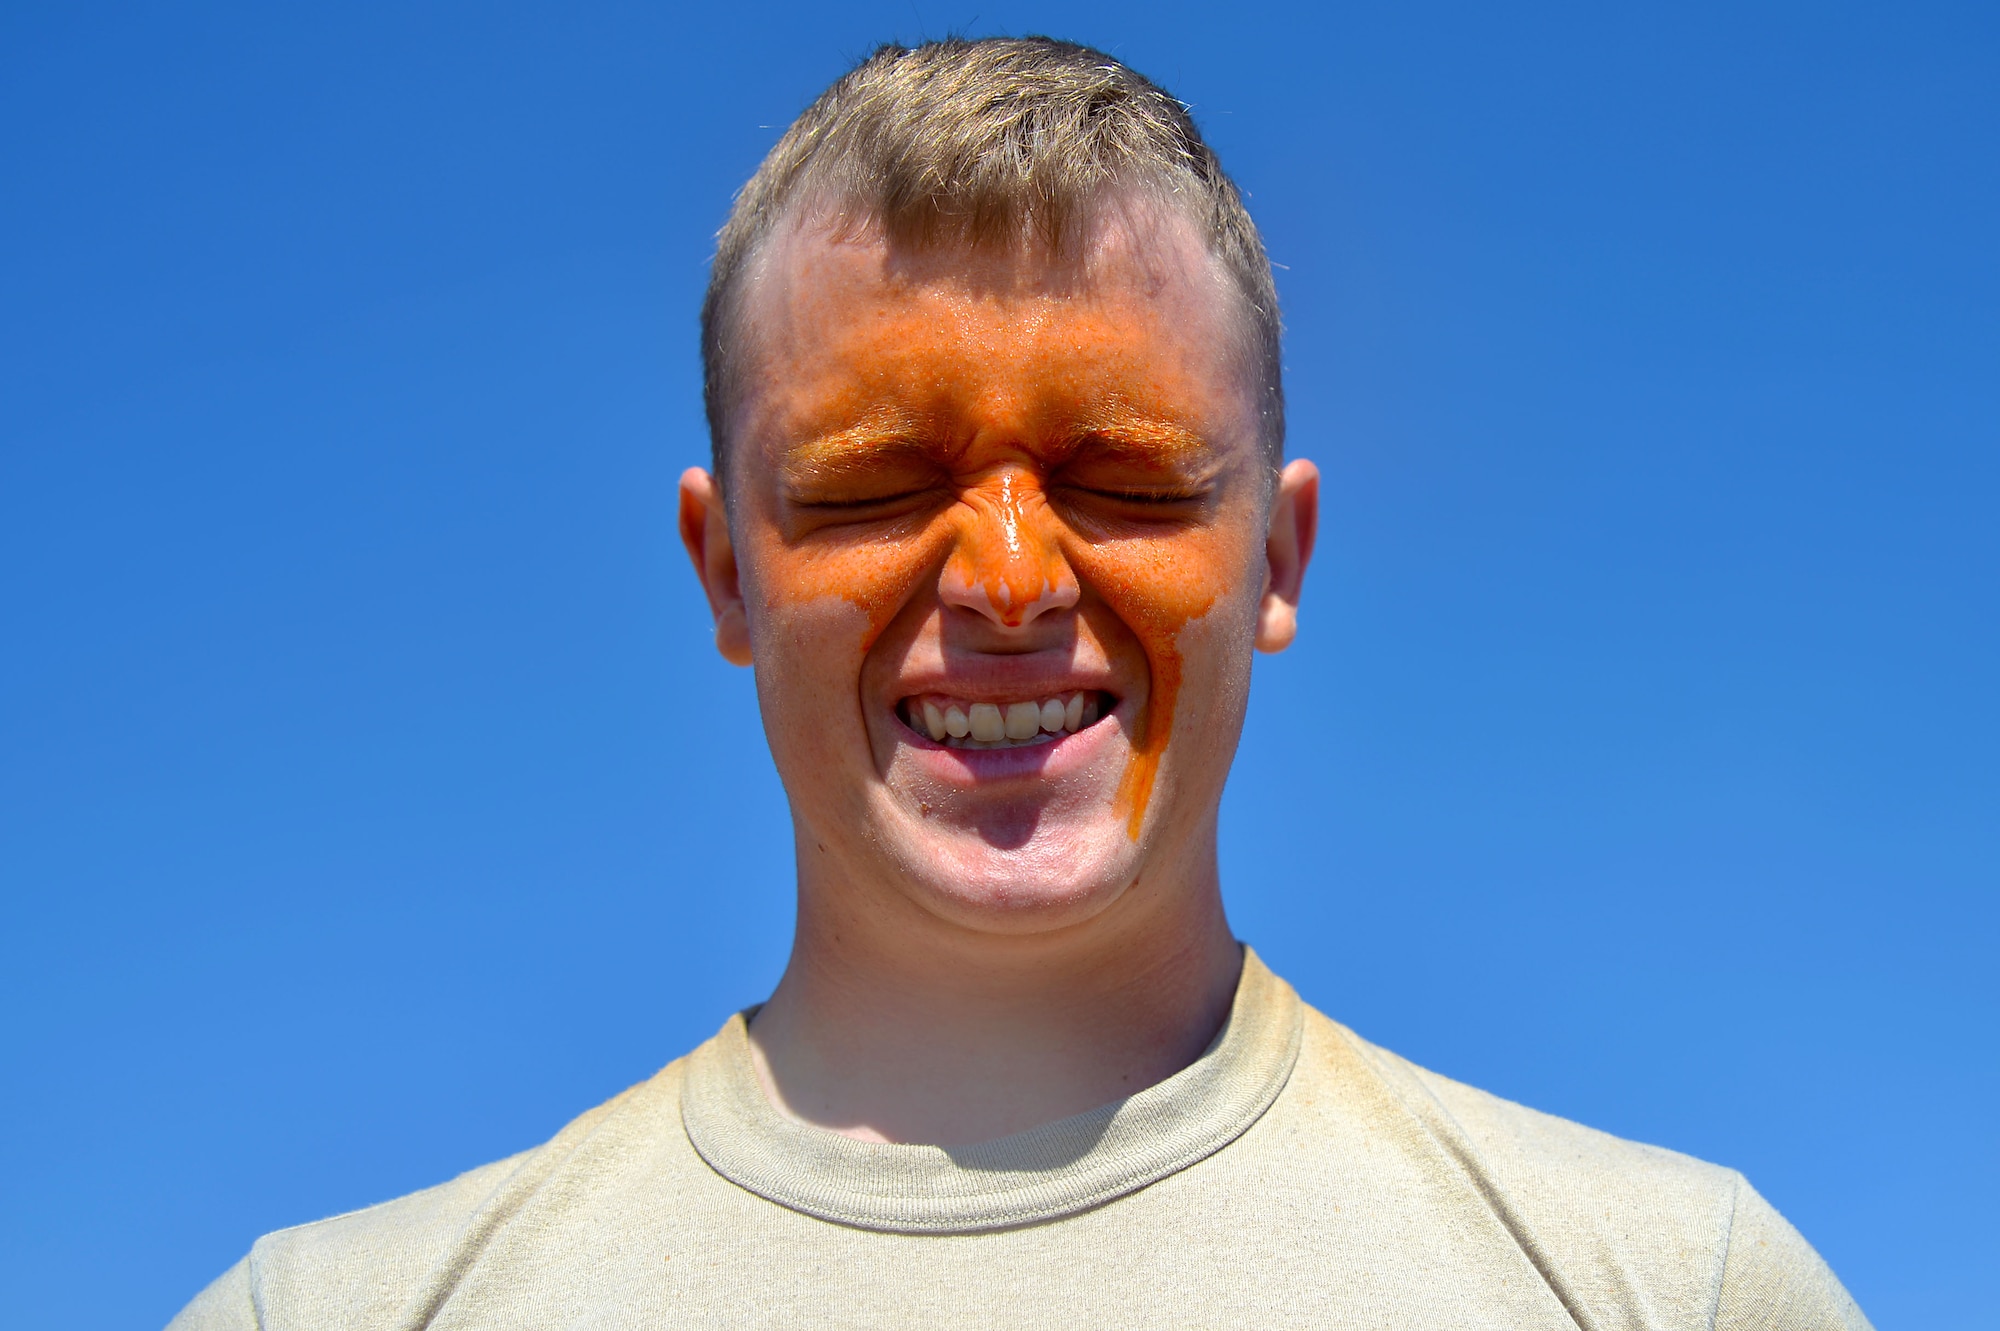 U.S. Air Force Airman 1st Class Dustyn Park, 20th Security Forces Squadron entry controller, counts to 10 after being pepper sprayed at Shaw Air Force Base, S.C., Feb. 29, 2016. Pepper spray is an inflammatory agent that can cause closing of the eyes, difficulty breathing, a runny nose, and coughing. (U.S. Air Force photo by Senior Airman Michael Cossaboom)